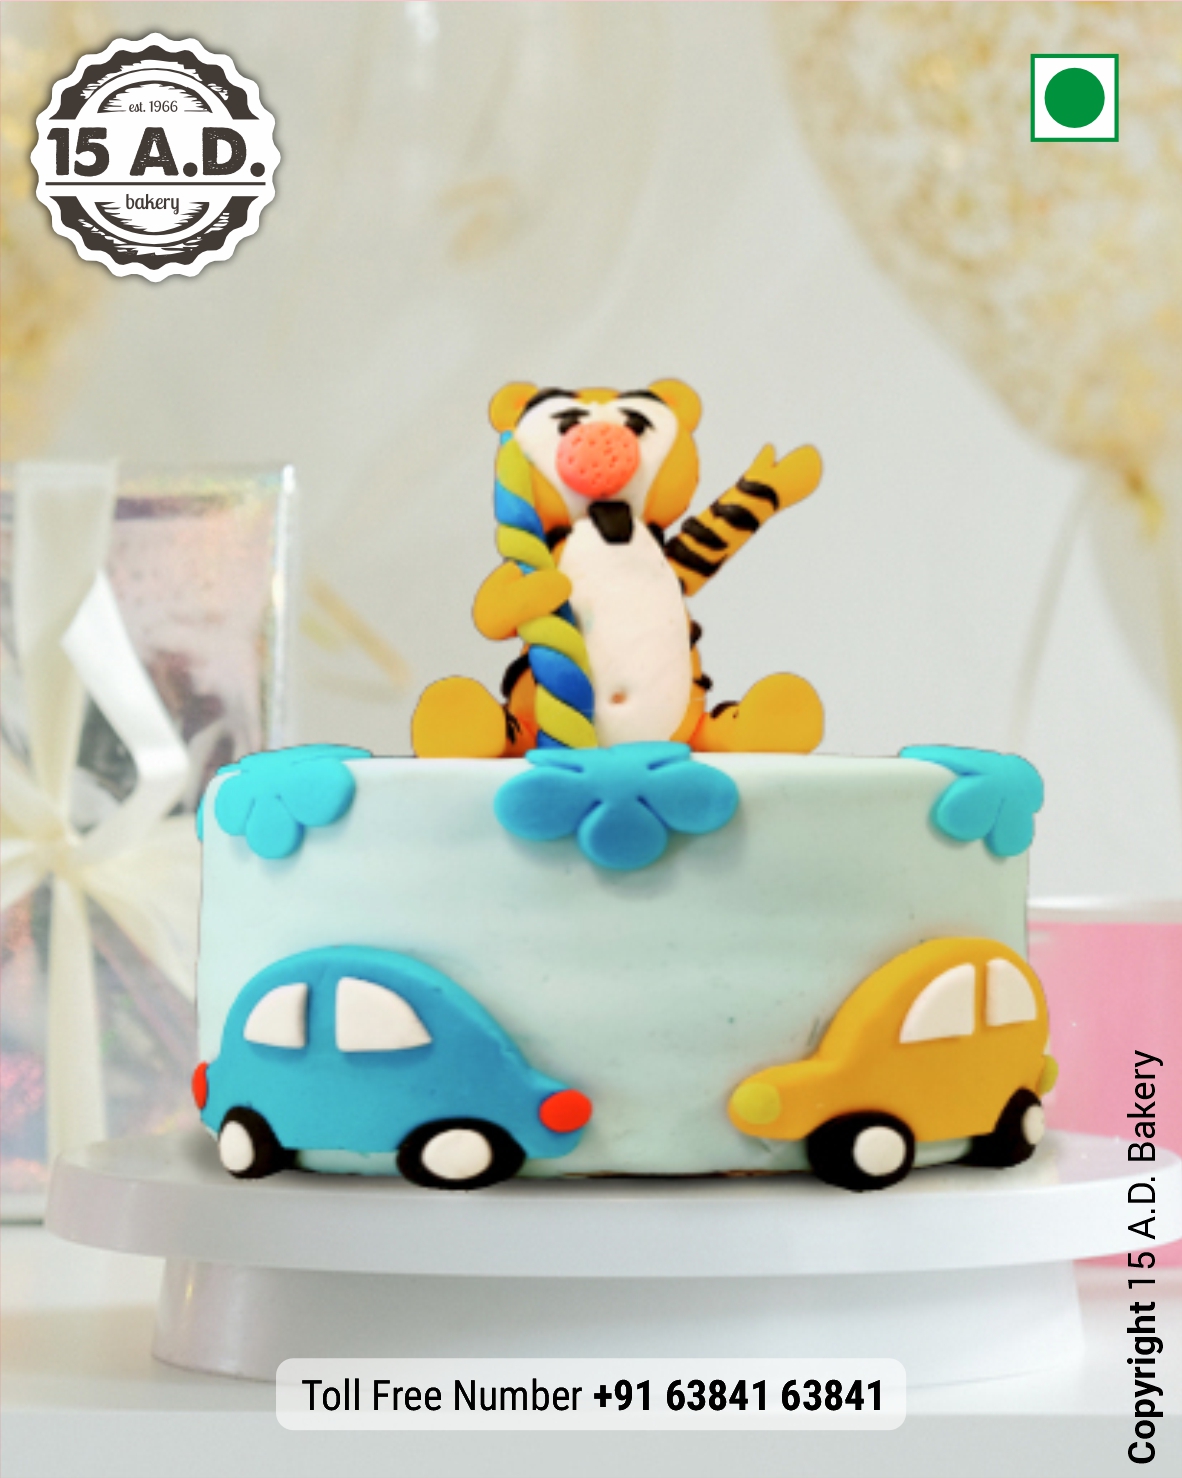 Car Cake by 15 AD Bakery